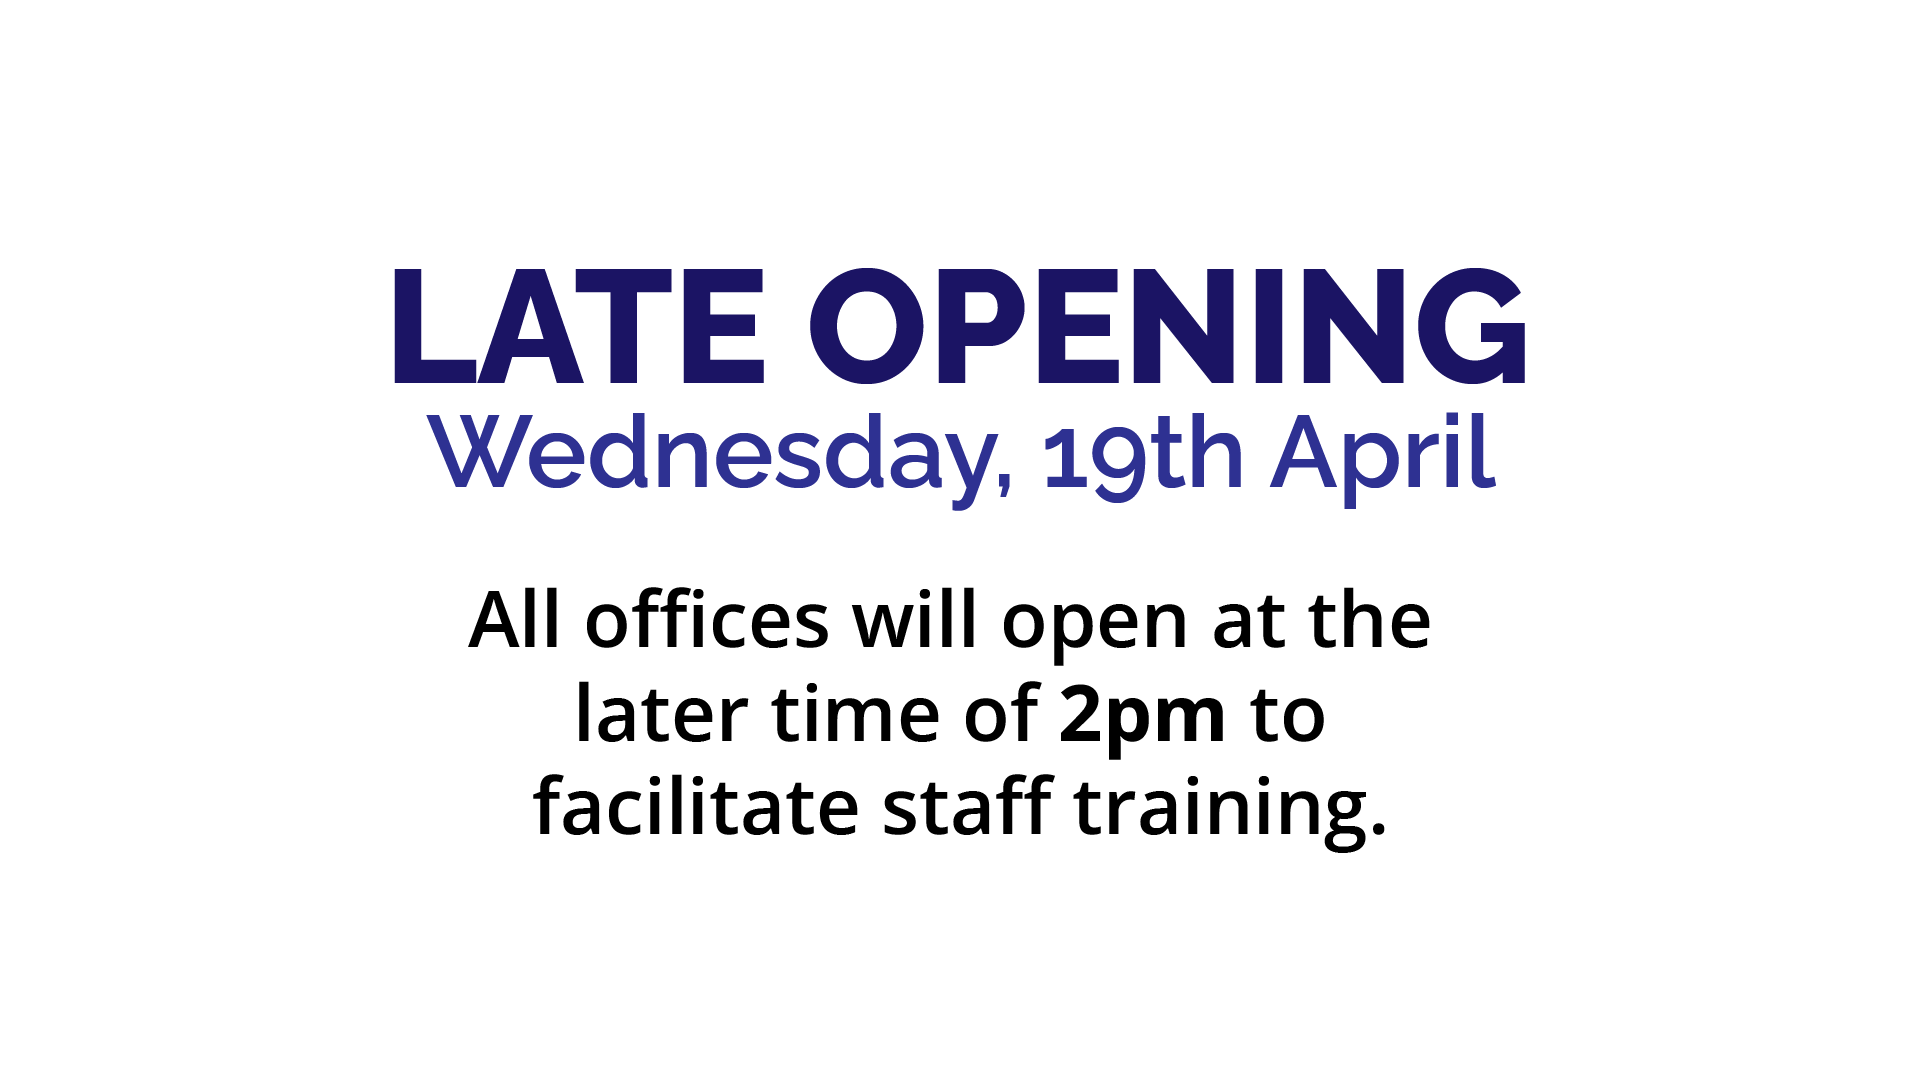 Late Opening on Wednesday 19th April